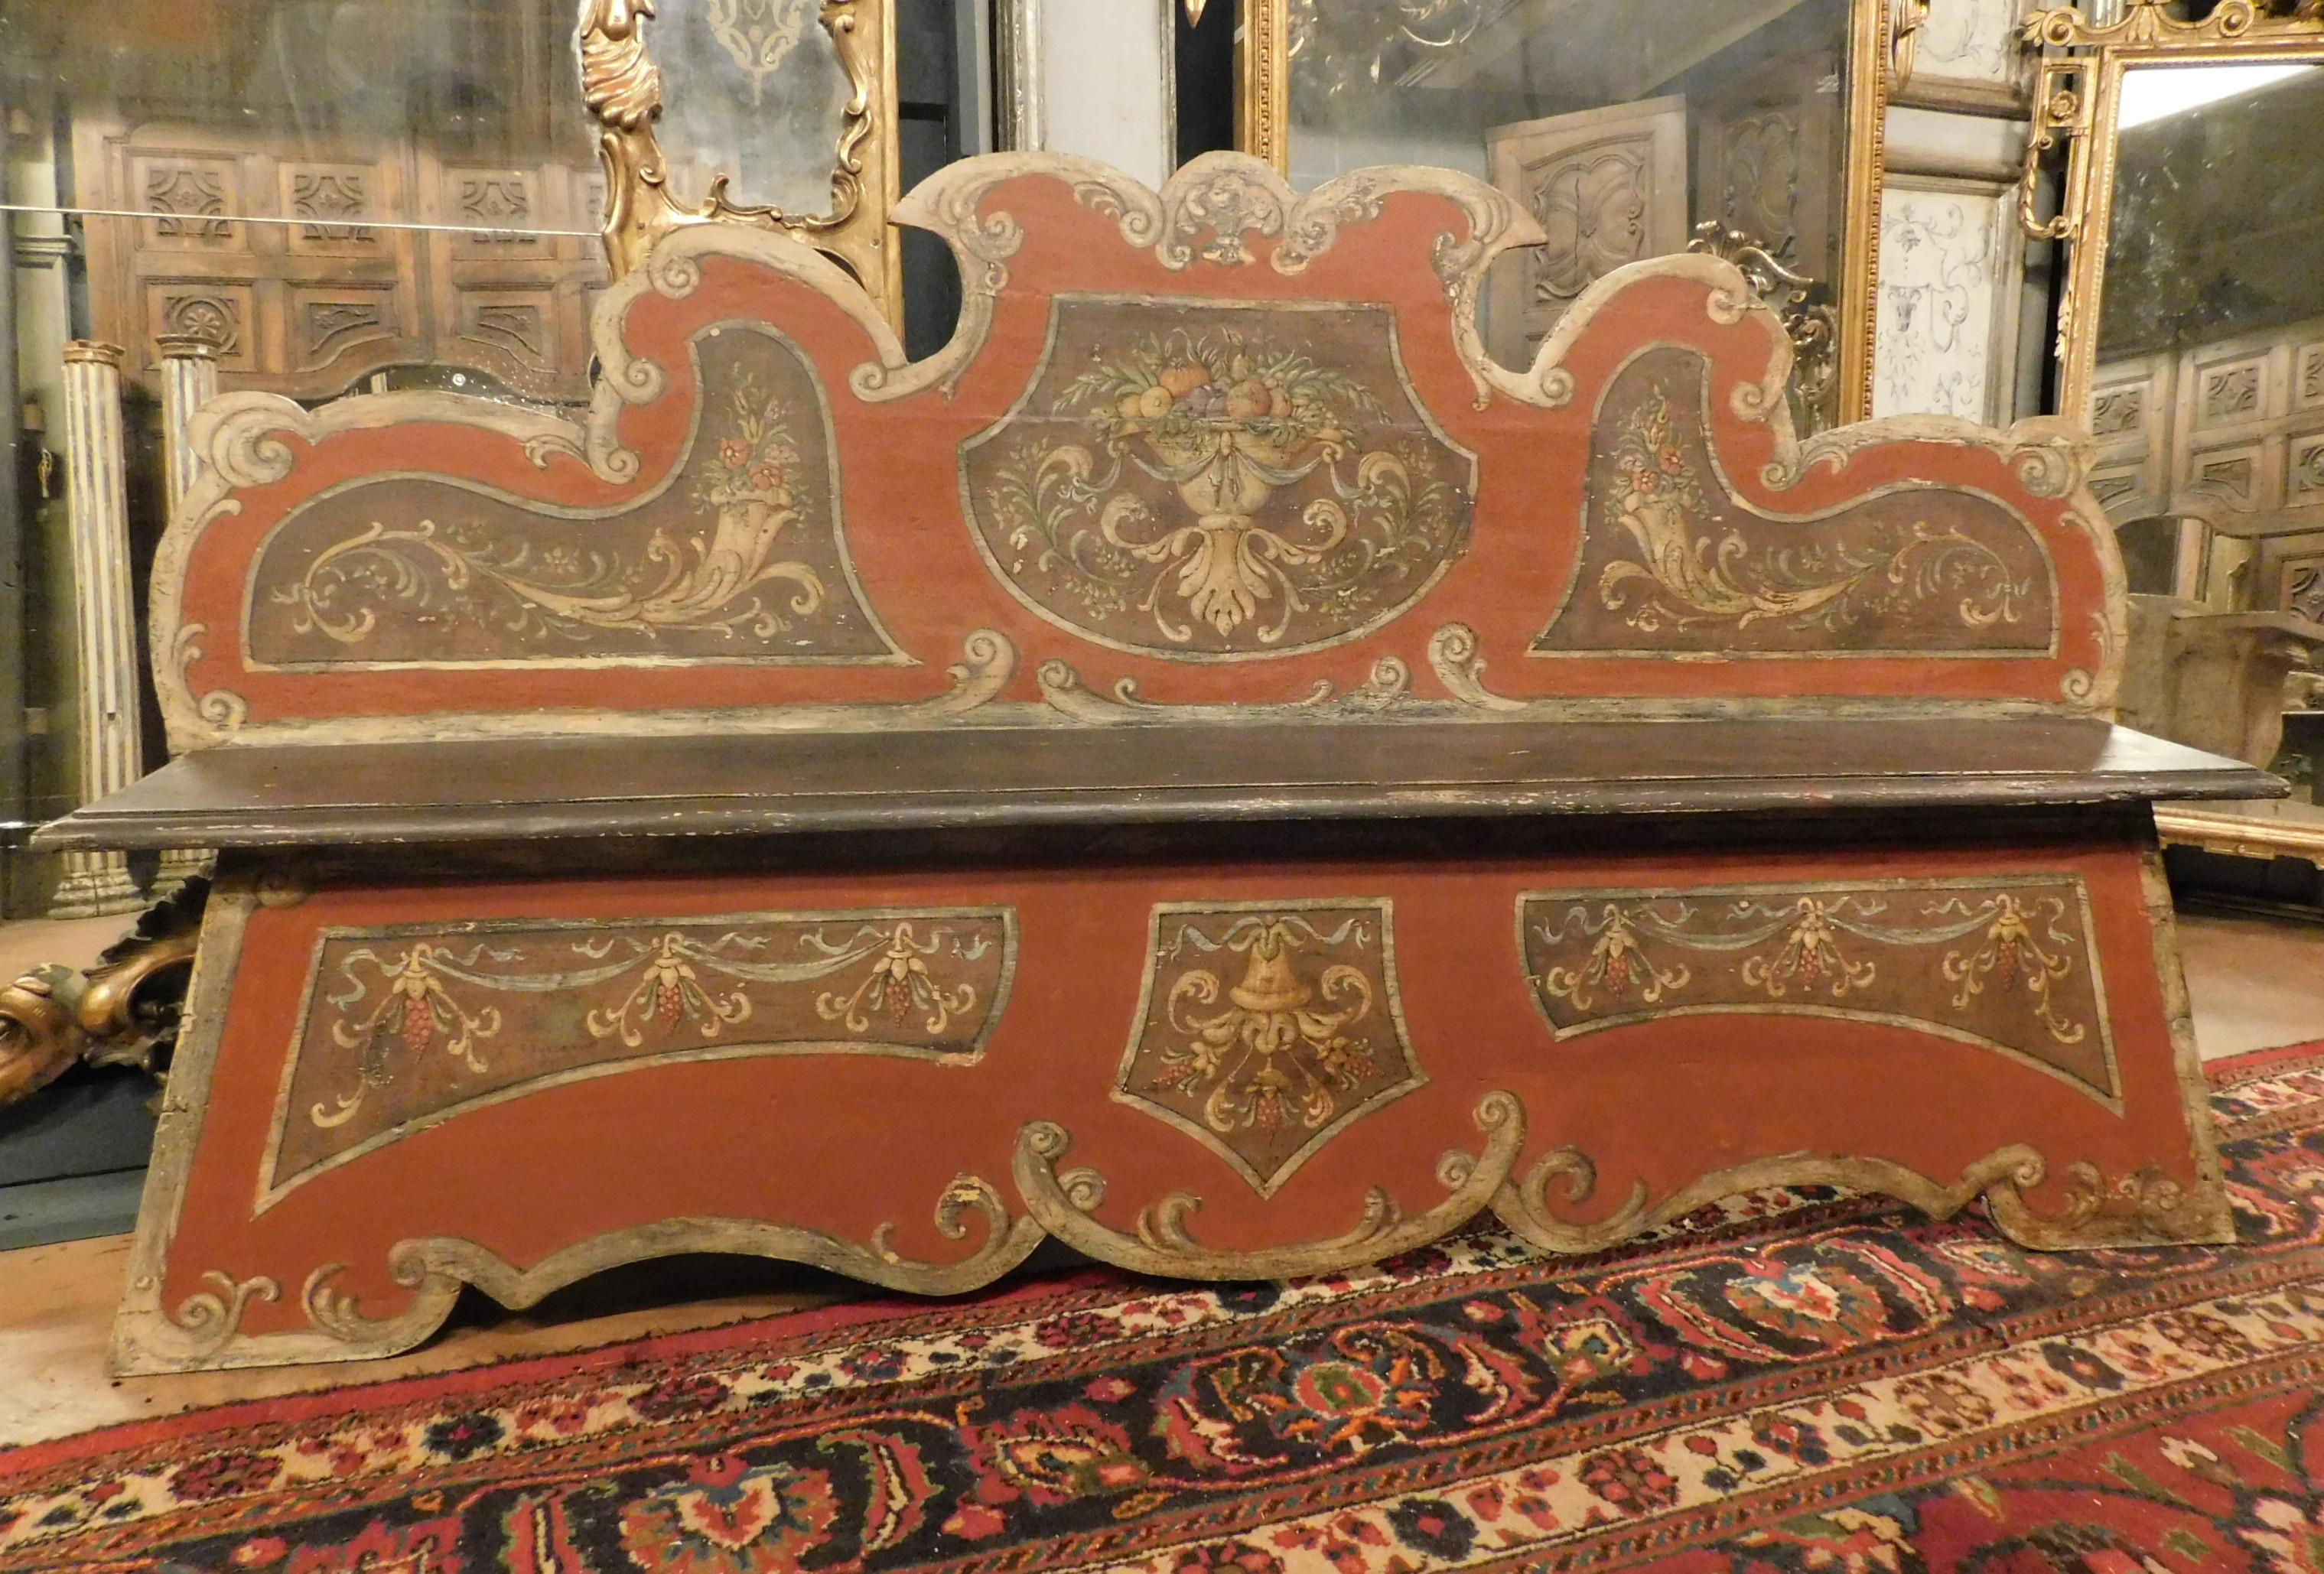 Ancient baroque bench, built entirely by hand in lacquered poplar with rich paintings and earth tones, built in the 18th century for an important entrance to a historic building in central Italy (Florence).
This fascinating bench can be used at the